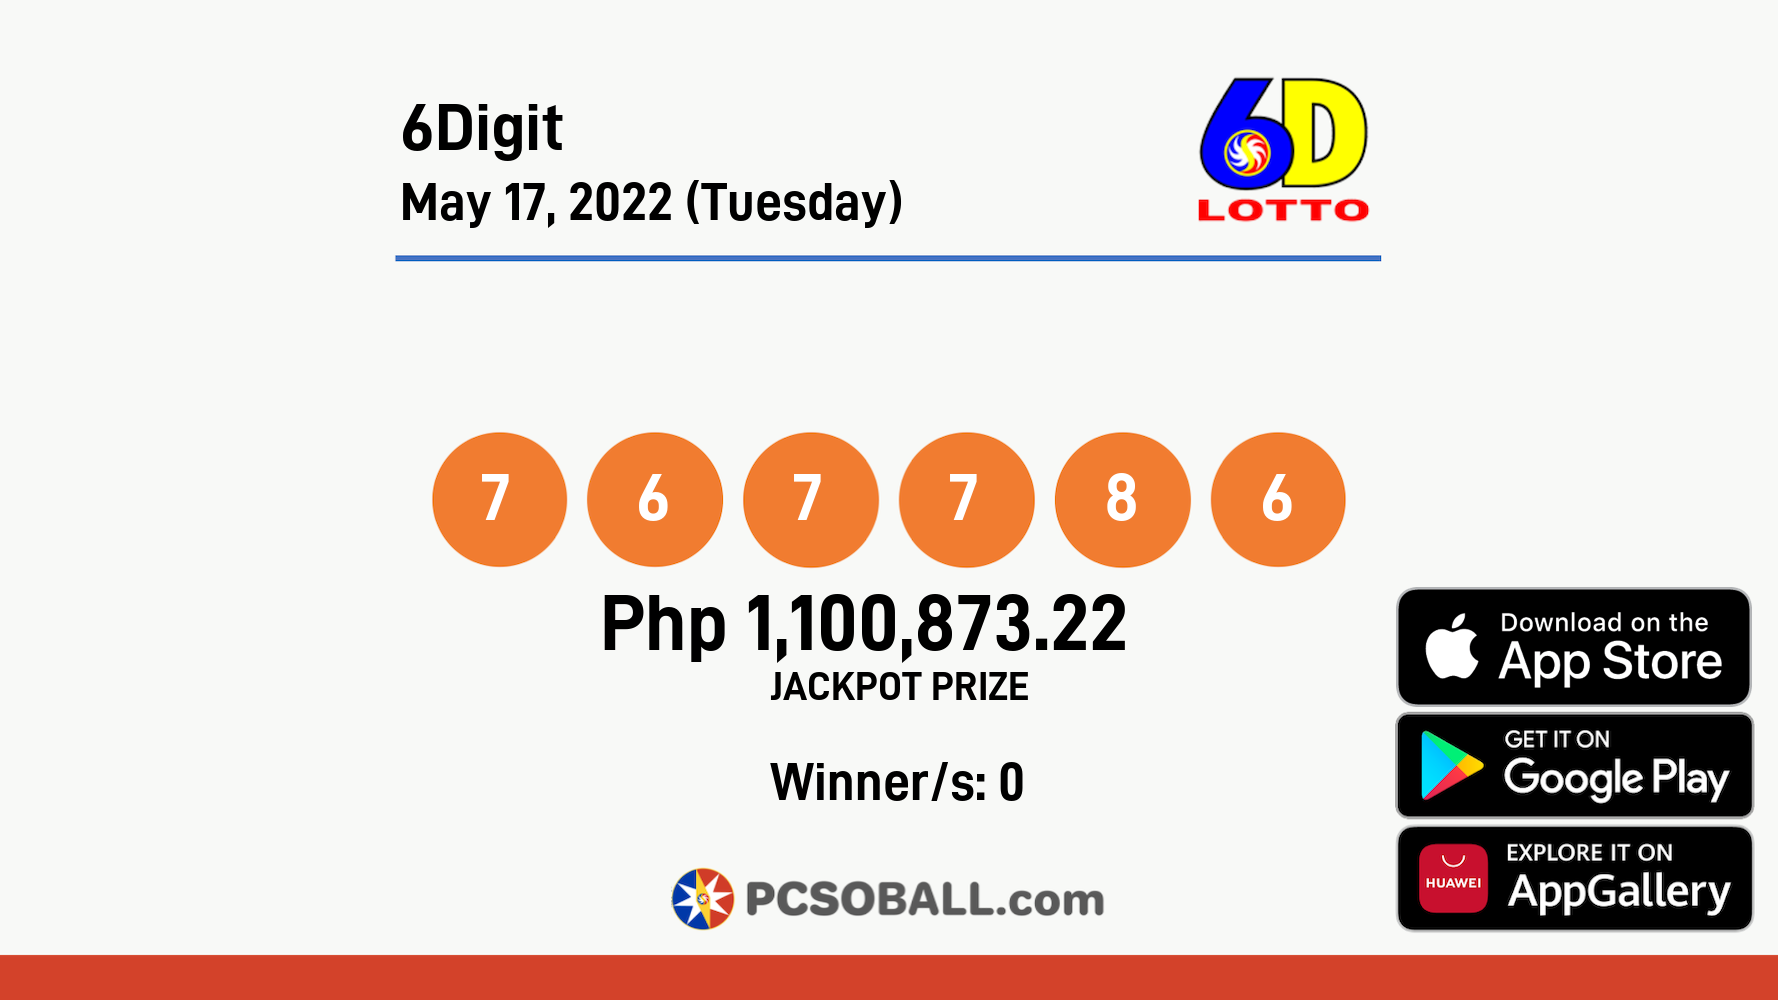 6Digit May 17, 2022 (Tuesday) Result